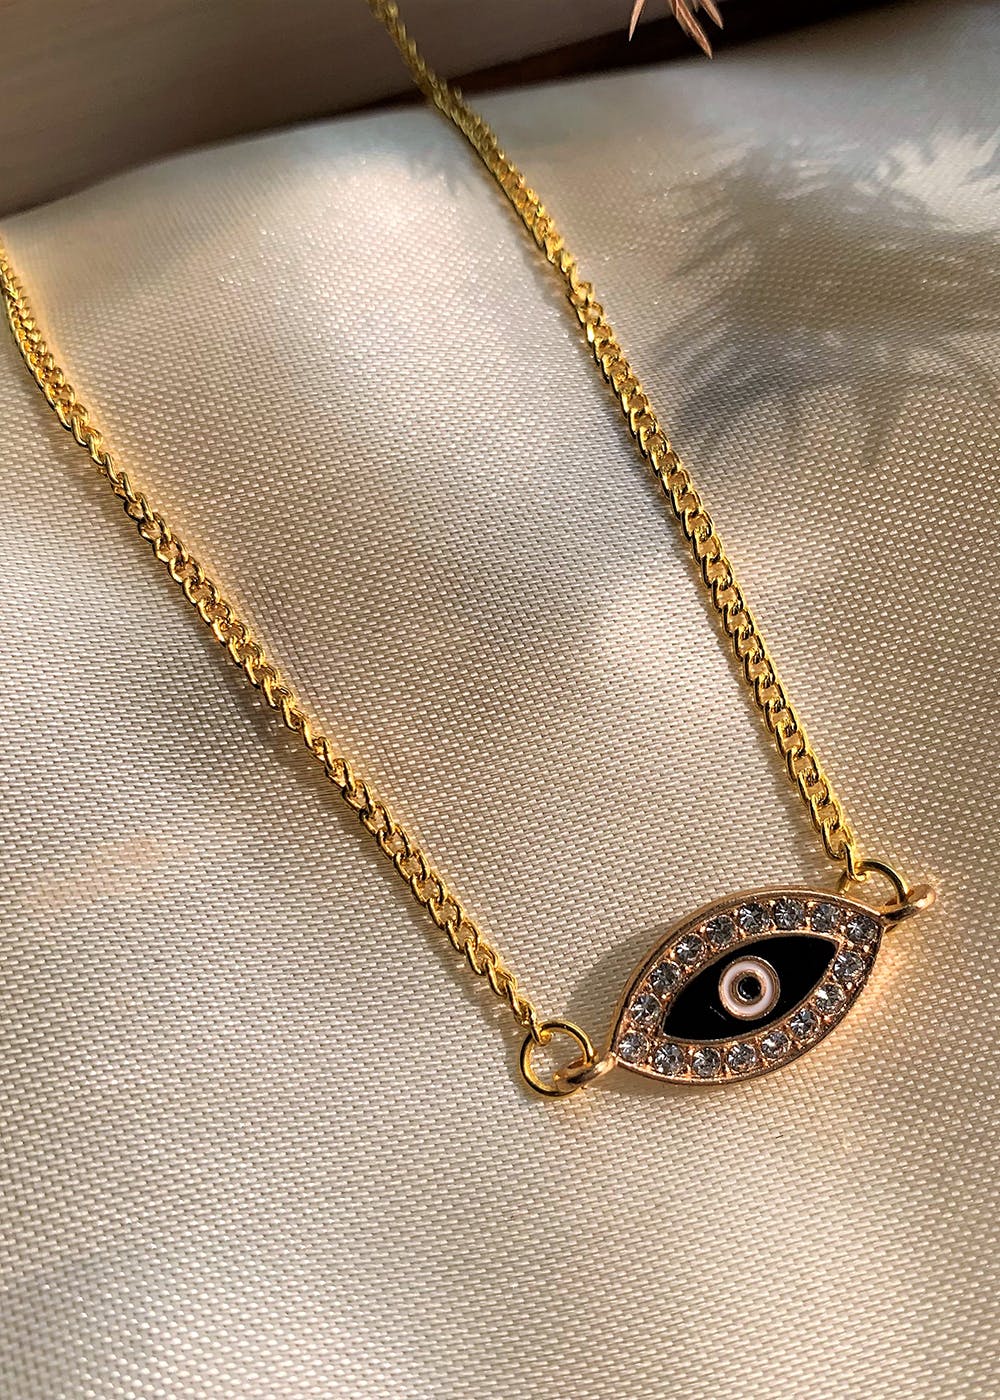 Heart shaped evil eye necklace in gold plating -